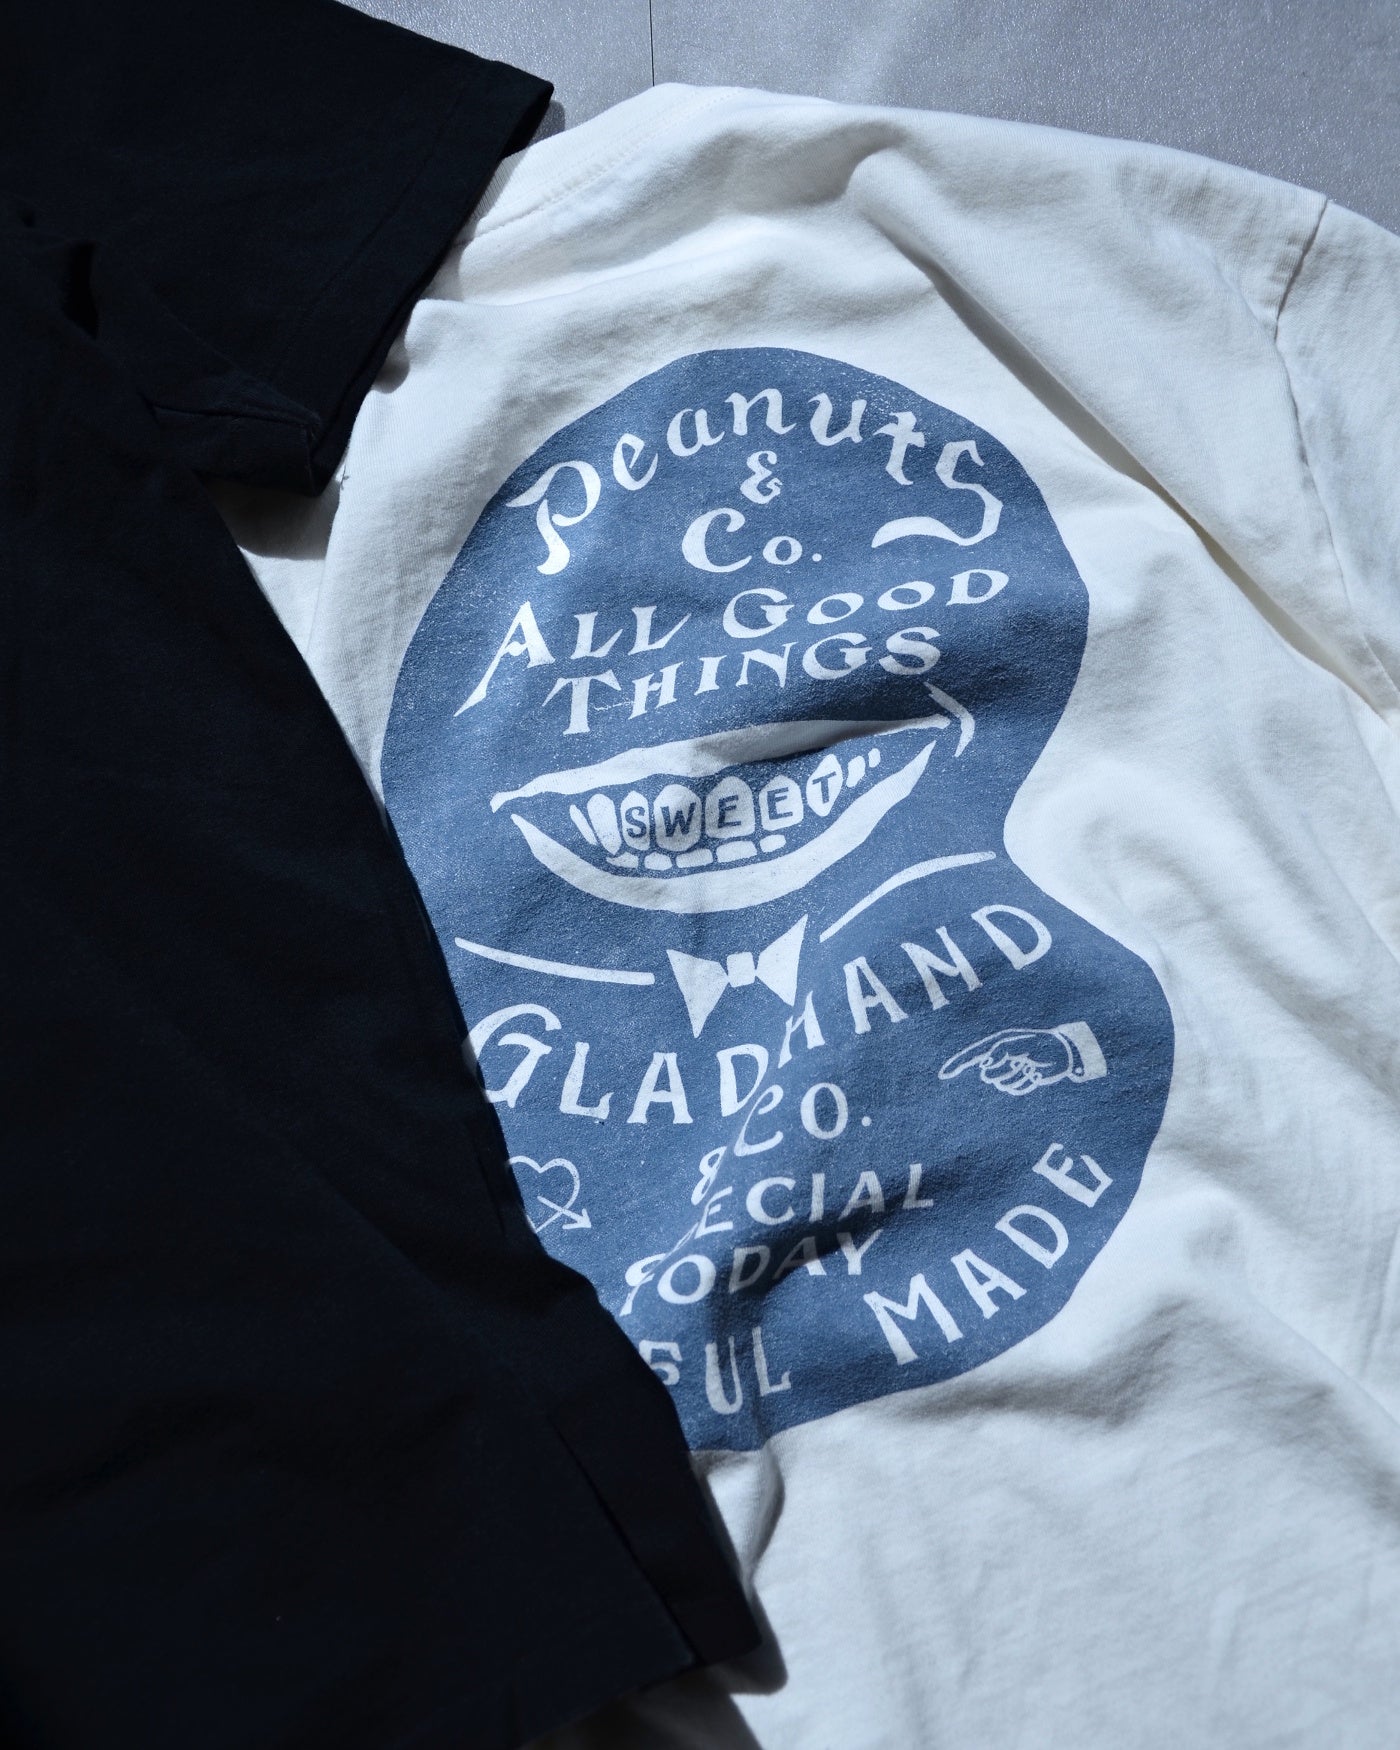 GLADHAND & Co. | Mr. SMILEY - S/S T-SHIRTS - White